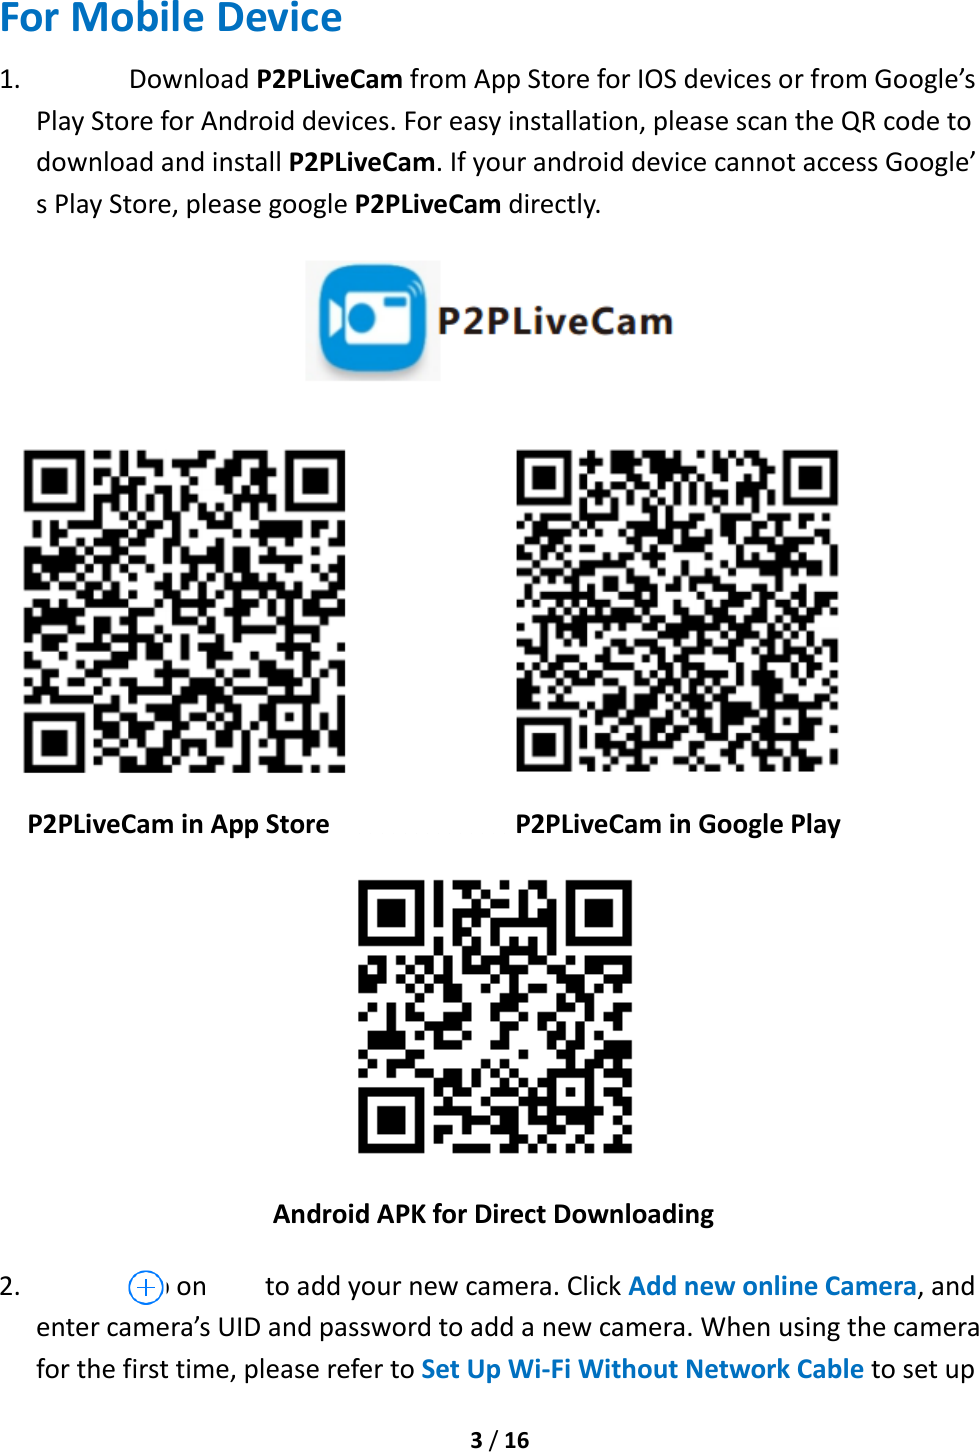  3 / 16  For Mobile Device 1. Download P2PLiveCam from App Store for IOS devices or from Google’s Play Store for Android devices. For easy installation, please scan the QR code to download and install P2PLiveCam. If your android device cannot access Google’ s Play Store, please google P2PLiveCam directly.      P2PLiveCam in App Store                 P2PLiveCam in Google Play  Android APK for Direct Downloading   2. Tap on        to add your new camera. Click Add new online Camera, and enter camera’s UID and password to add a new camera. When using the camera for the first time, please refer to Set Up Wi-Fi Without Network Cable to set up 